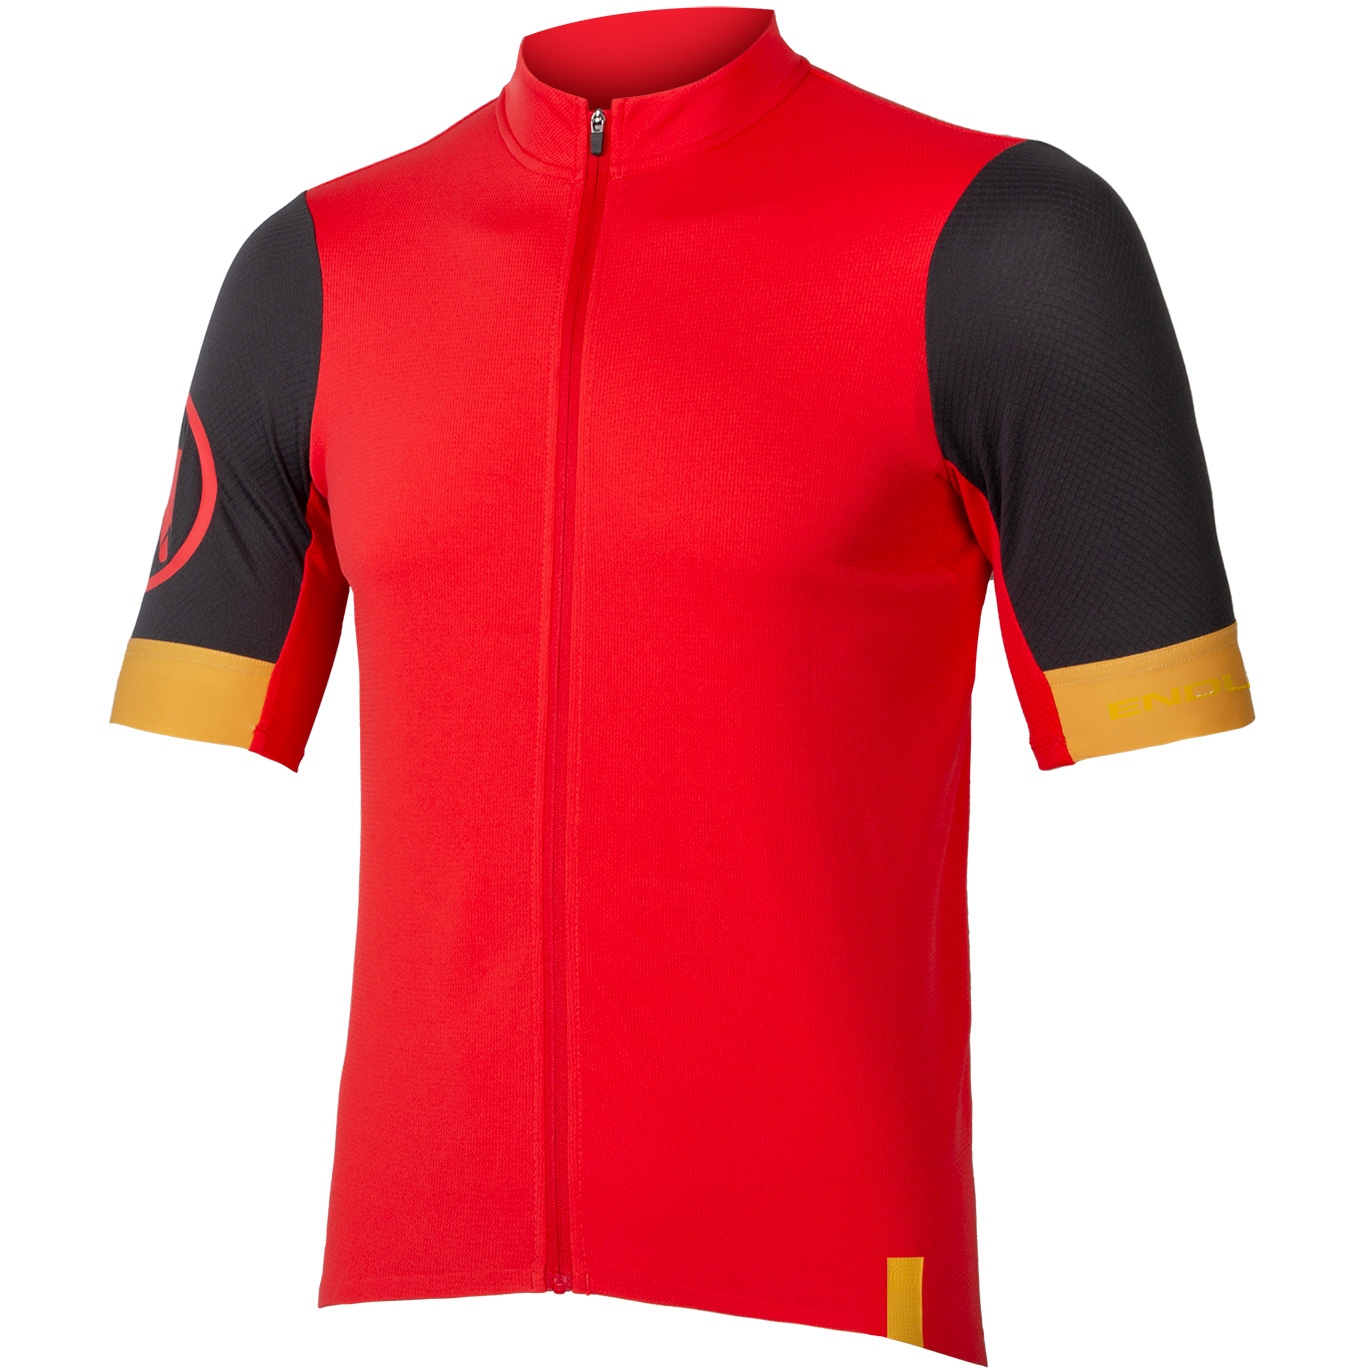 Picture of Endura FS260 Short Sleeve Jersey - relaxed Fit - pomegranate